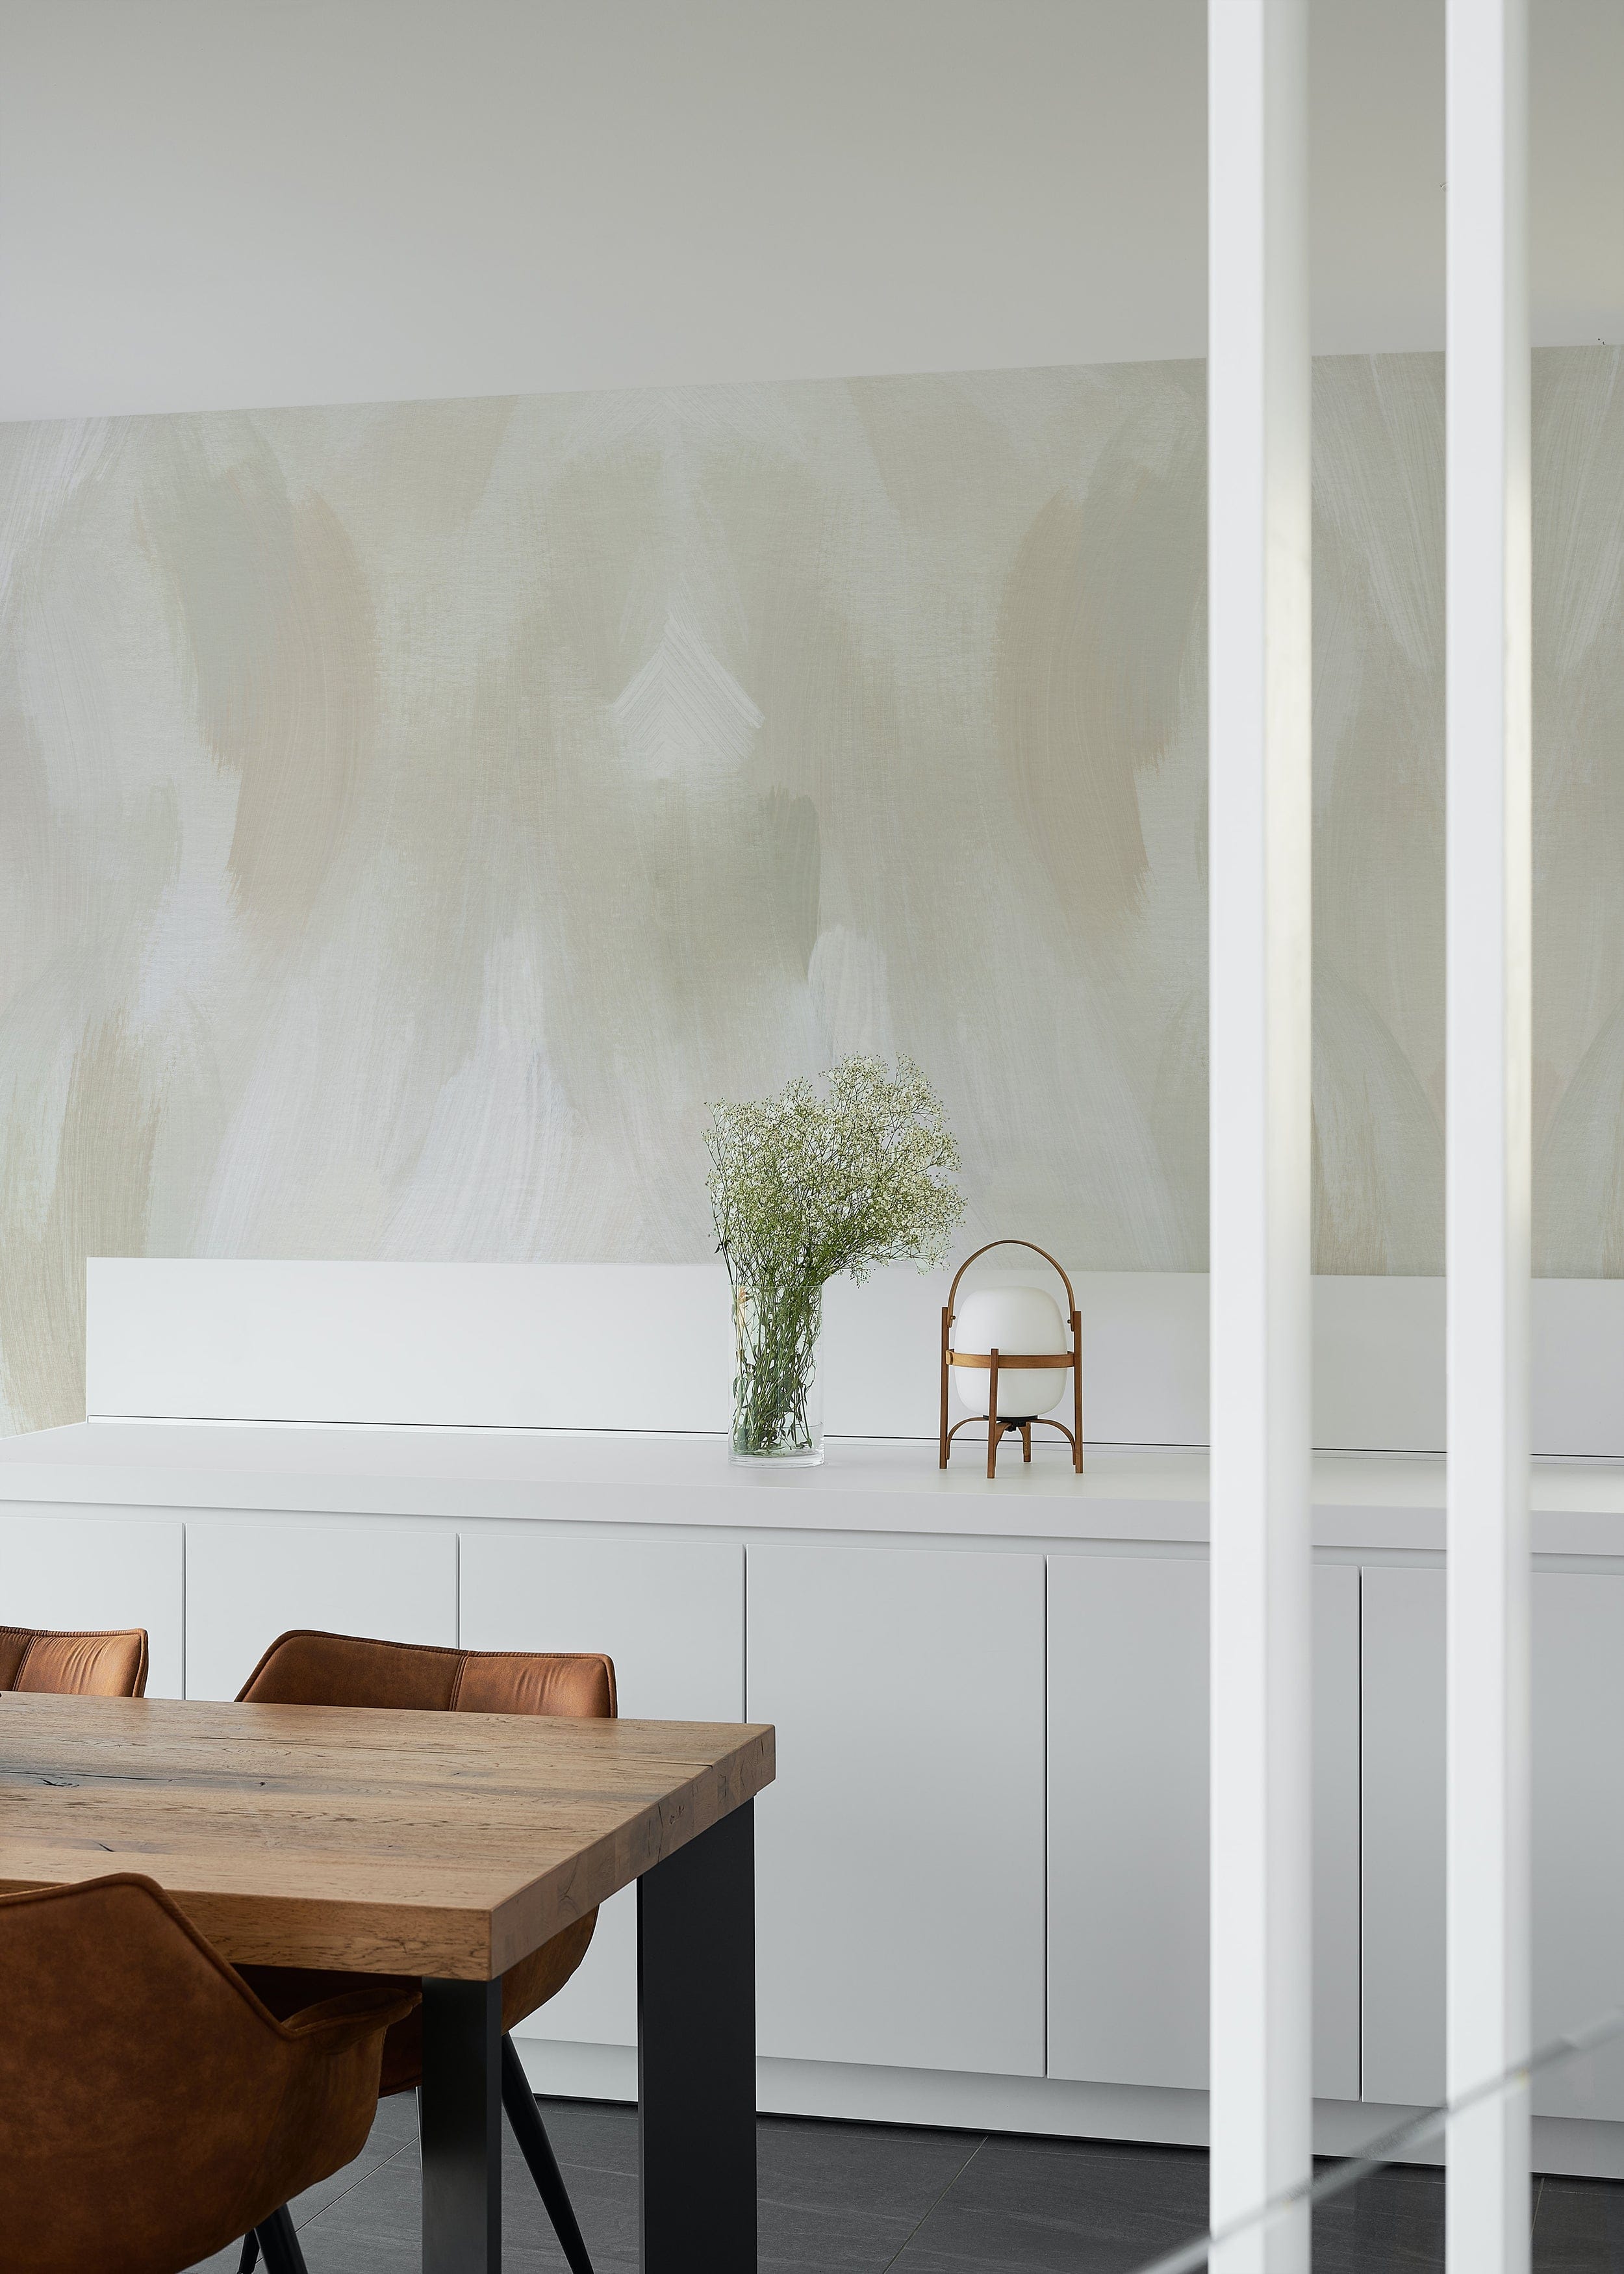 Earthy Aura Paint Texture Mural Wallpaper in a contemporary kitchen with a wooden dining table, leather chairs, white cabinets, and a vase of fresh flowers, highlighting the subtle and soothing paint texture design